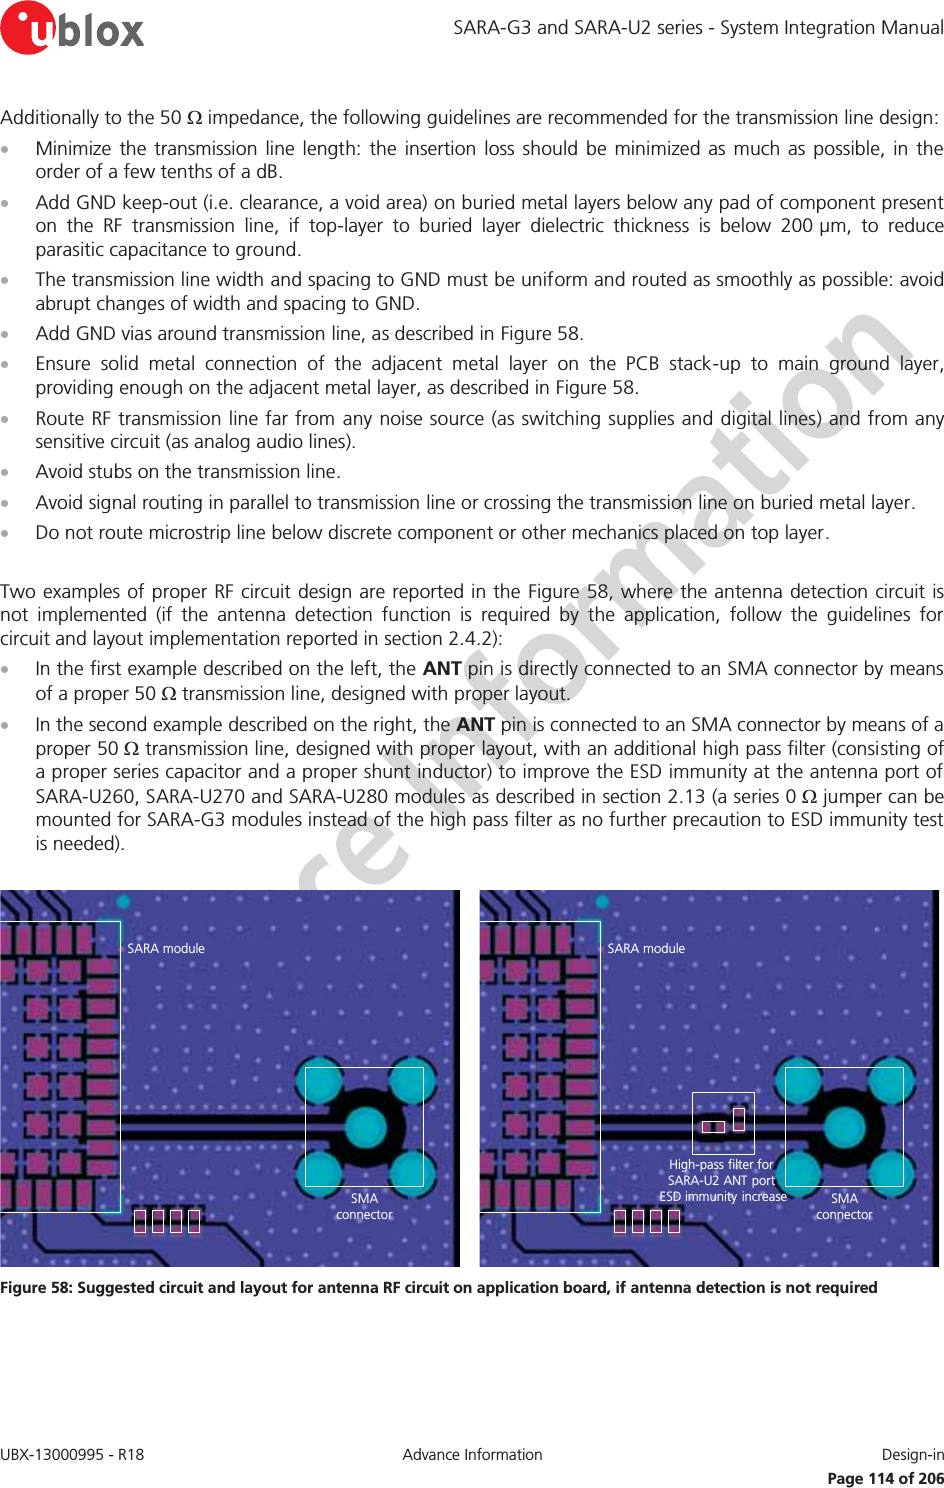 SARA-G3 and SARA-U2 series - System Integration Manual UBX-13000995 - R18  Advance Information  Design-in   Page 114 of 206 Additionally to the 50 : impedance, the following guidelines are recommended for the transmission line design: x Minimize the transmission line length: the insertion loss should be minimized as much as possible, in the order of a few tenths of a dB. x Add GND keep-out (i.e. clearance, a void area) on buried metal layers below any pad of component present on the RF transmission line, if top-layer to buried layer dielectric thickness is below 200 μm, to reduce parasitic capacitance to ground. x The transmission line width and spacing to GND must be uniform and routed as smoothly as possible: avoid abrupt changes of width and spacing to GND. x Add GND vias around transmission line, as described in Figure 58. x Ensure solid metal connection of the adjacent metal layer on the PCB stack-up to main ground layer, providing enough on the adjacent metal layer, as described in Figure 58. x Route RF transmission line far from any noise source (as switching supplies and digital lines) and from any sensitive circuit (as analog audio lines). x Avoid stubs on the transmission line. x Avoid signal routing in parallel to transmission line or crossing the transmission line on buried metal layer. x Do not route microstrip line below discrete component or other mechanics placed on top layer.  Two examples of proper RF circuit design are reported in the Figure 58, where the antenna detection circuit is not implemented (if the antenna detection function is required by the application, follow the guidelines for circuit and layout implementation reported in section 2.4.2): x In the first example described on the left, the ANT pin is directly connected to an SMA connector by means of a proper 50 : transmission line, designed with proper layout. x In the second example described on the right, the ANT pin is connected to an SMA connector by means of a proper 50 : transmission line, designed with proper layout, with an additional high pass filter (consisting of a proper series capacitor and a proper shunt inductor) to improve the ESD immunity at the antenna port of SARA-U260, SARA-U270 and SARA-U280 modules as described in section 2.13 (a series 0 : jumper can be mounted for SARA-G3 modules instead of the high pass filter as no further precaution to ESD immunity test is needed).  SARA moduleSMAconnectorSARA moduleSMAconnectorHigh-pass filter for SARA-U2 ANT port ESD immunity increase Figure 58: Suggested circuit and layout for antenna RF circuit on application board, if antenna detection is not required  